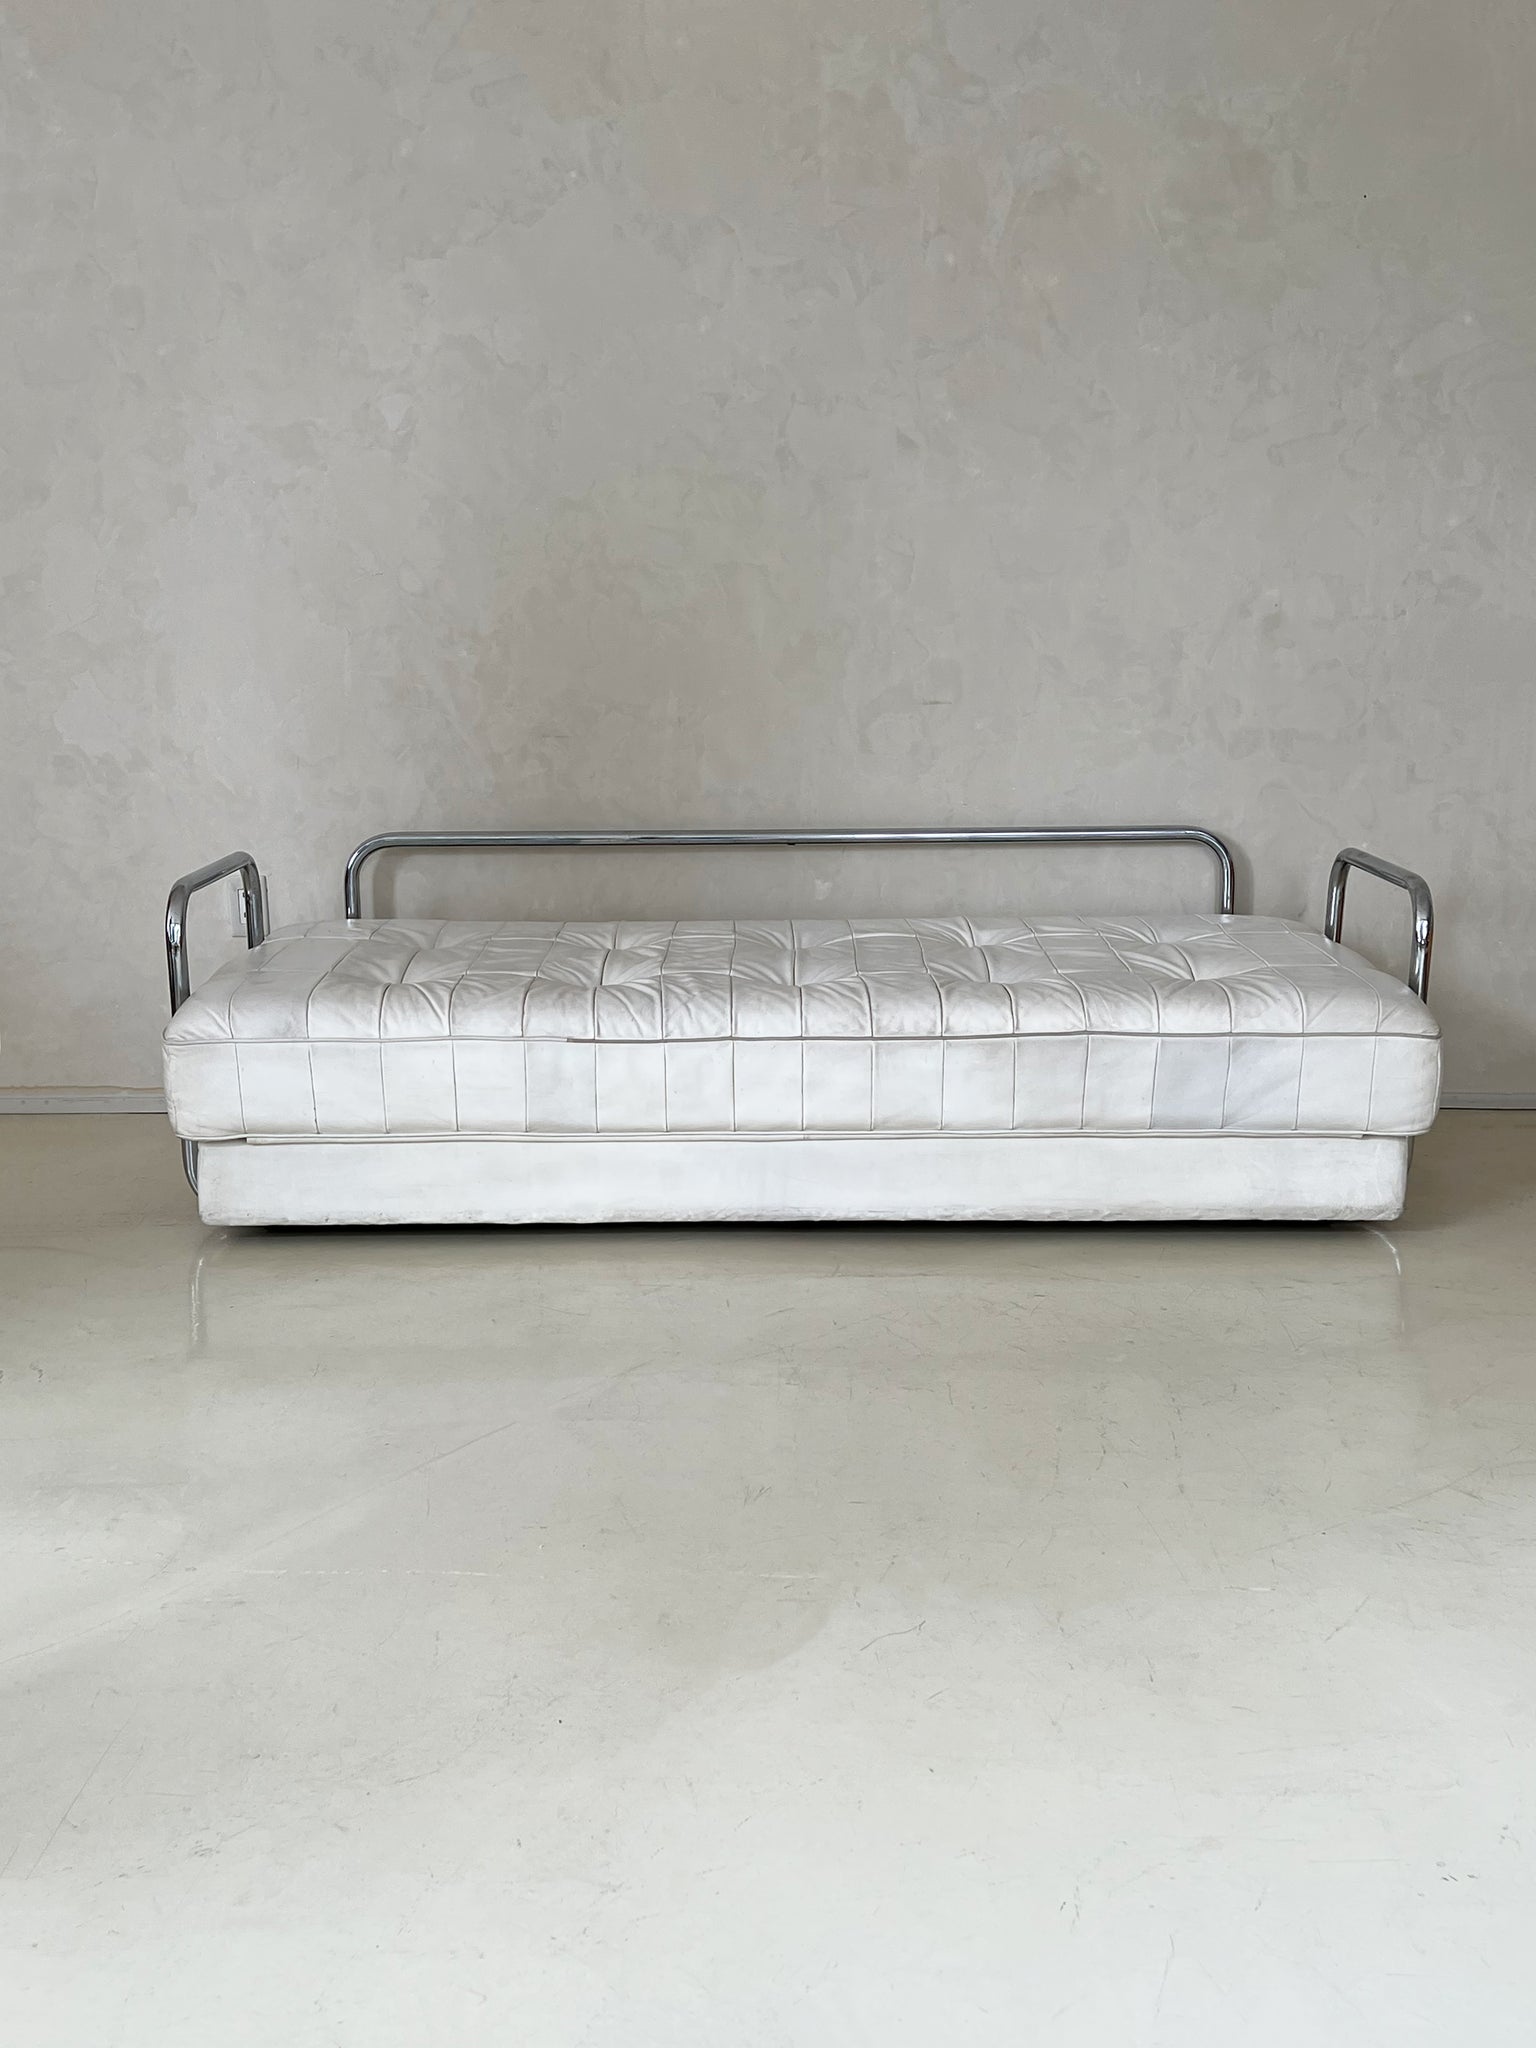 Rare Vintage De Sede White Leather Daybed Sofa Bed